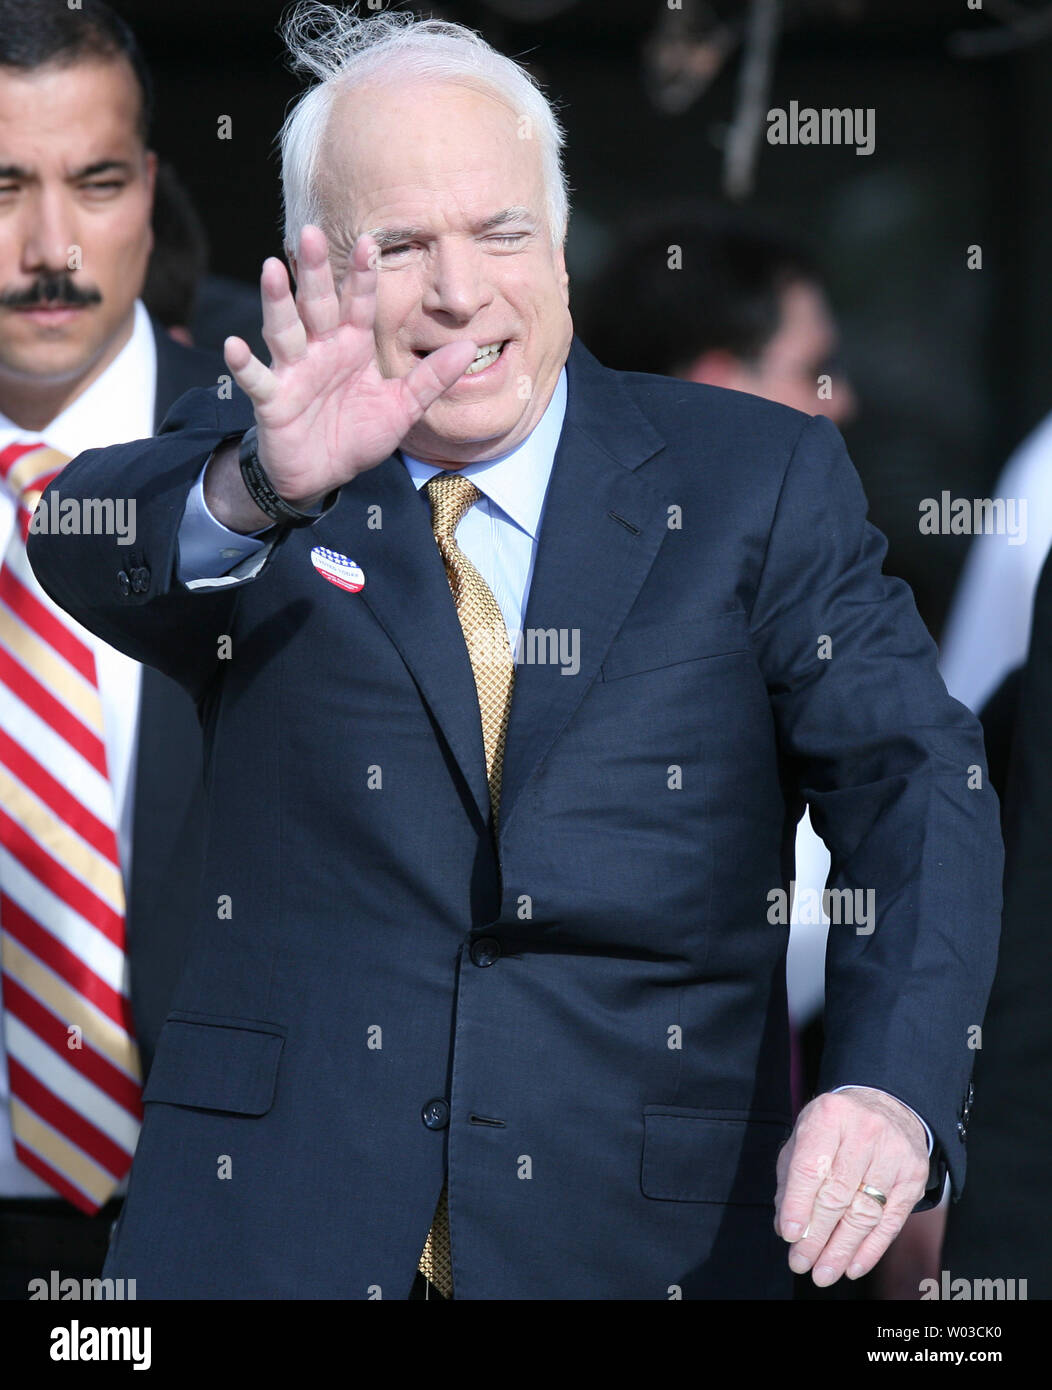 Republican presidential candidate Sen. John McCain (R-AZ) waves as he exits his polling place after casting his vote at Albright United Methodist Church in Phoenix, Arizona on November 4,2008. (UPI Photo/Art Foxall) Stock Photo